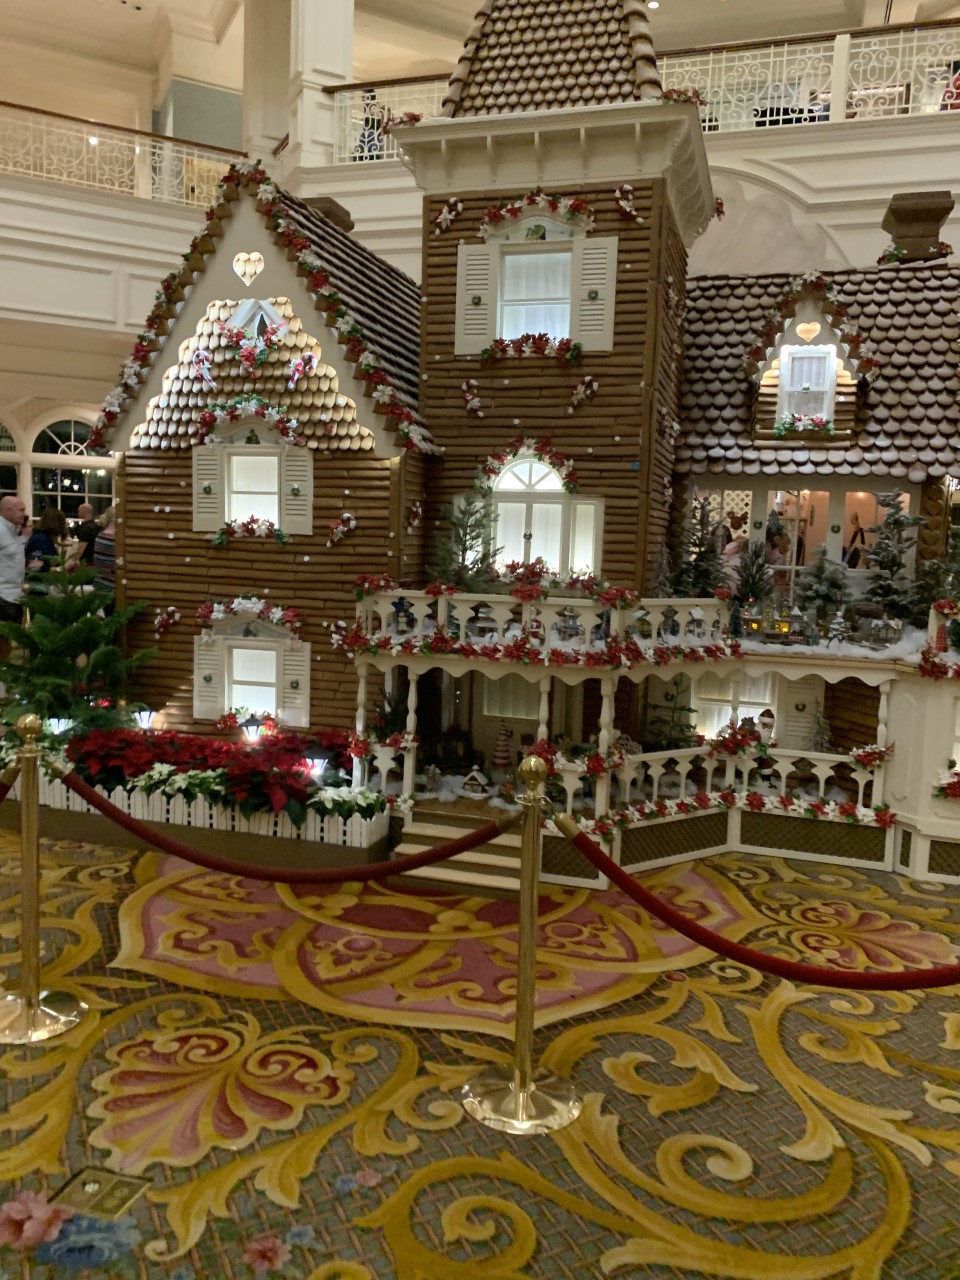 Disney Monorail Hotels gingerbread house in the lobby of the grand Floridian resort